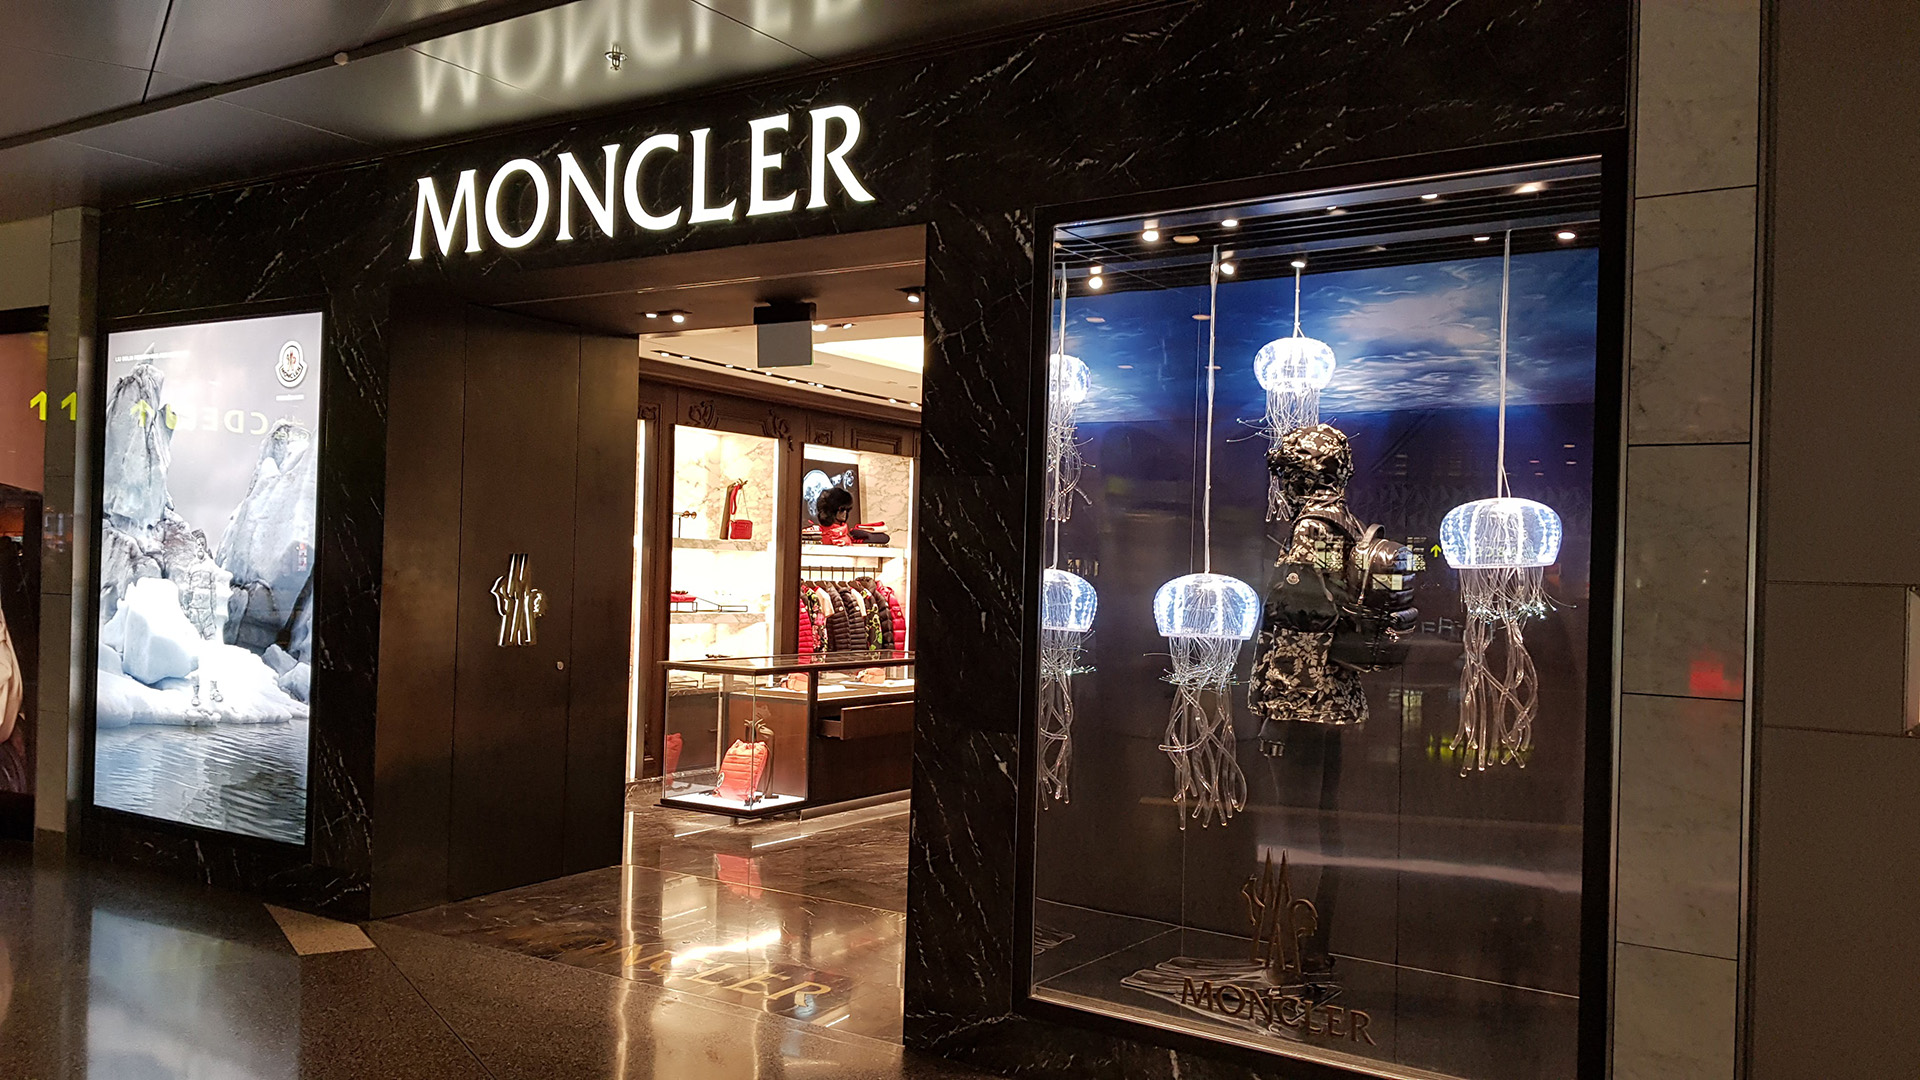 Moncler Jelly Fish Window produced by ME Visual, Qatar. This display uses Fiber-optic lights.